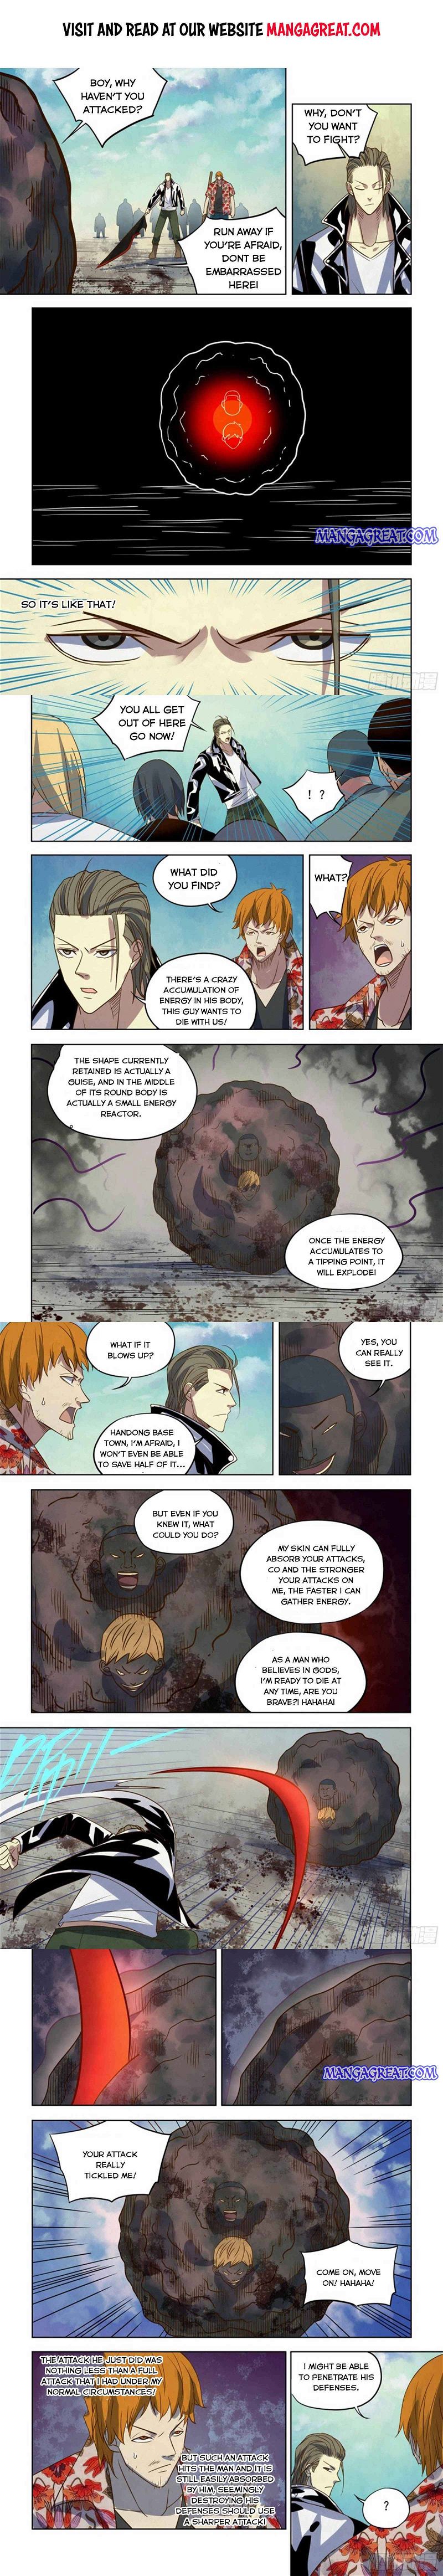 The Last Human Chapter 362 page 1